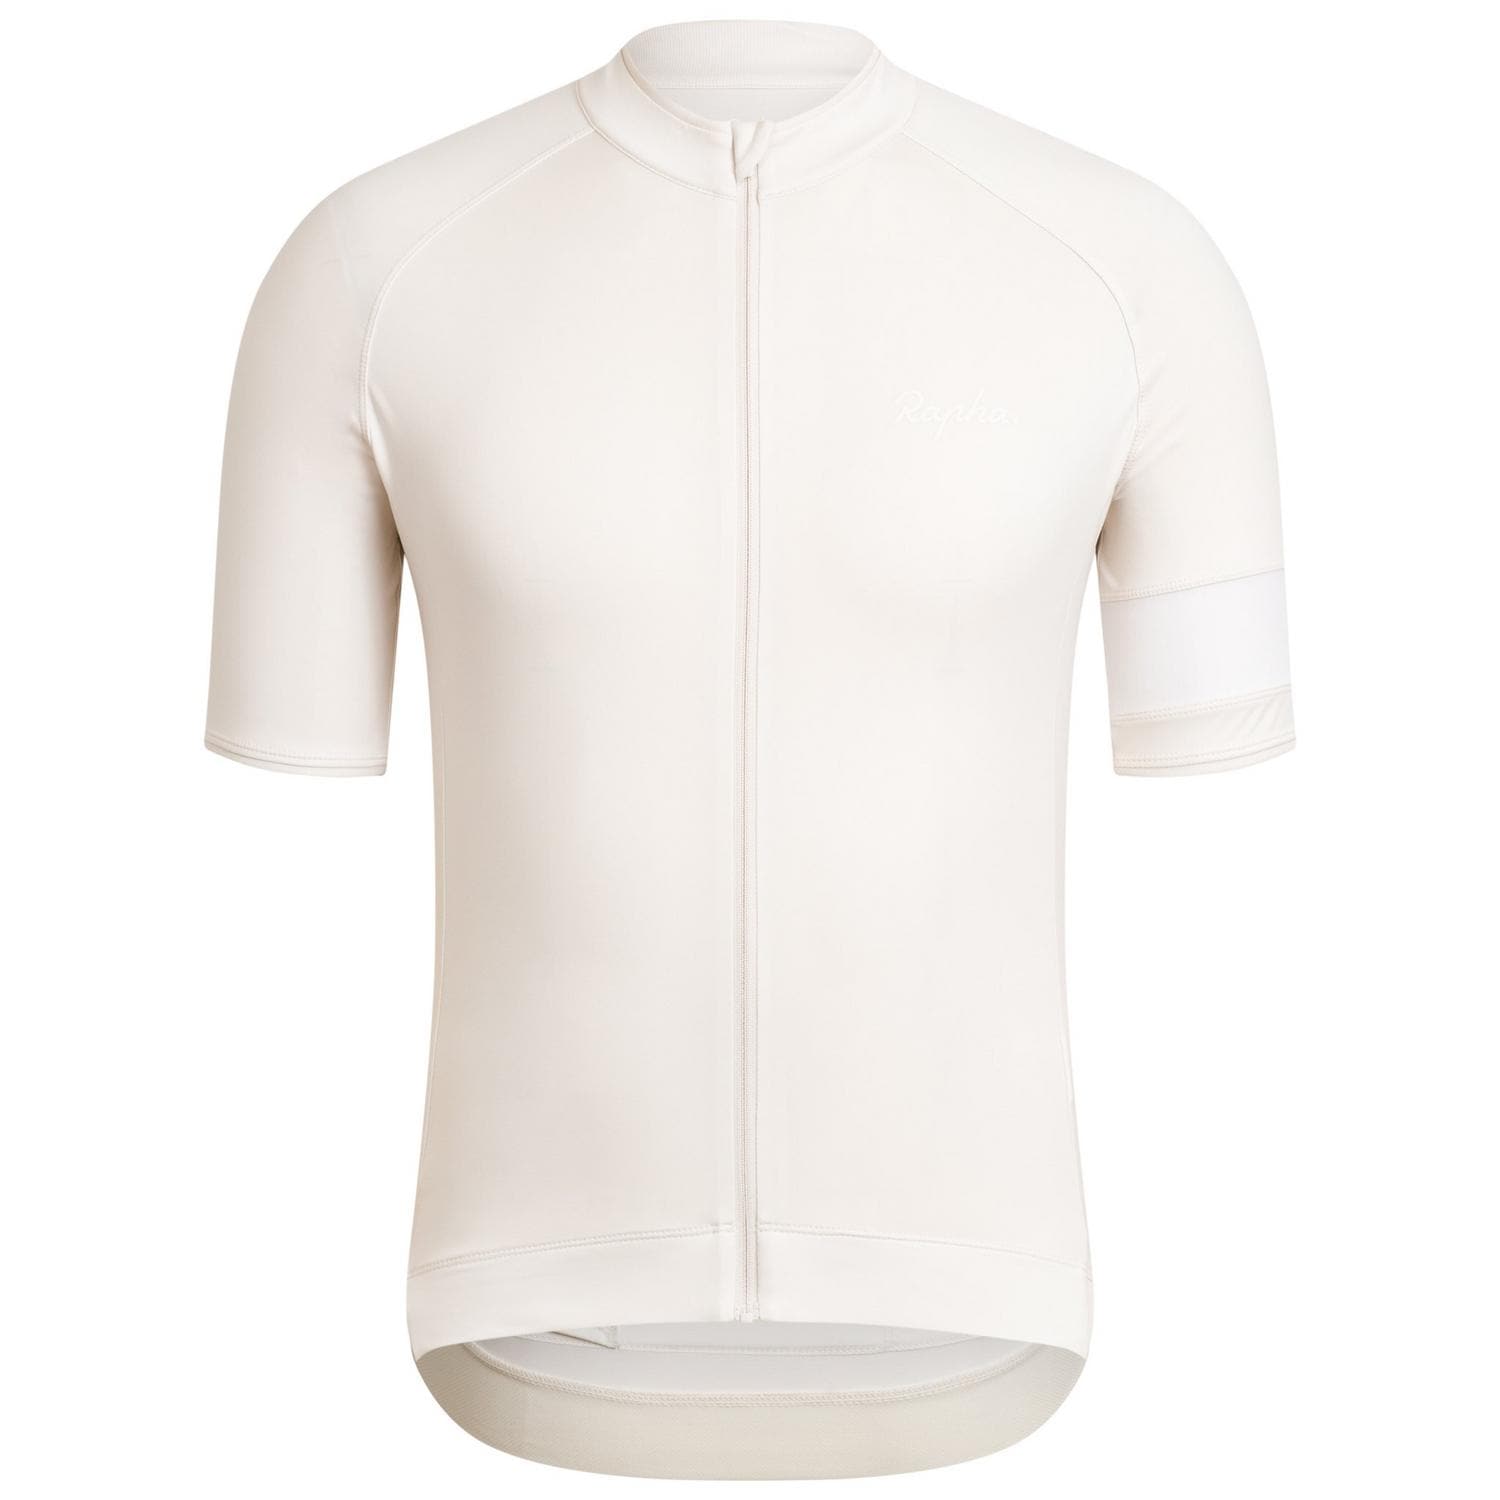 RAPHA Core Jersey - BCH Off White front panel